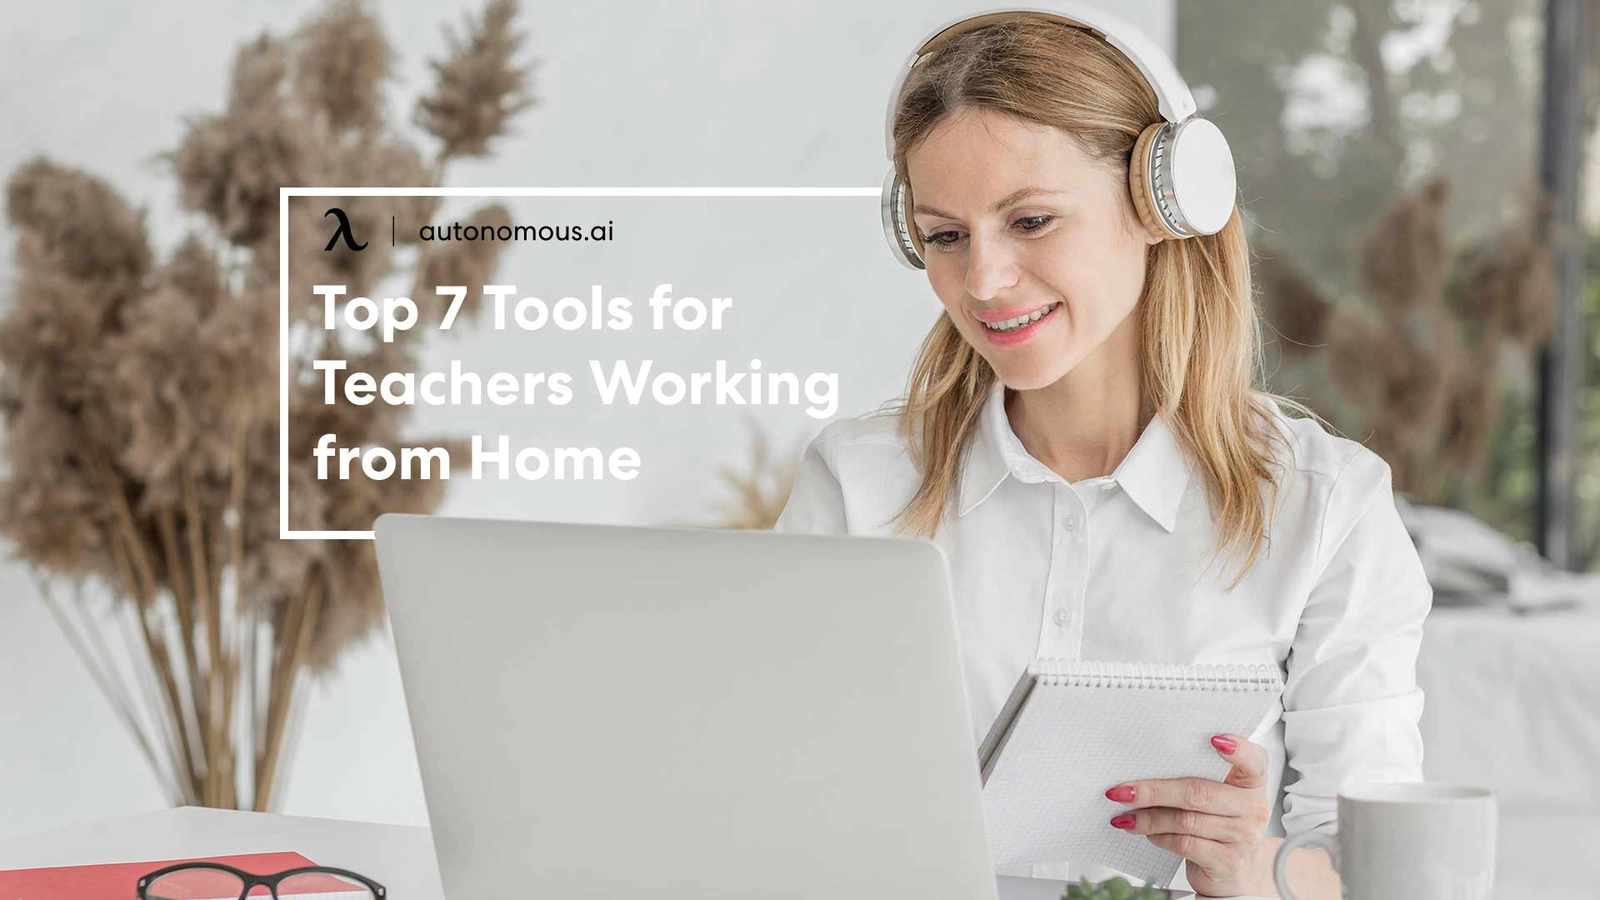 Top 7 Online Teaching Tools for Teachers Working from Home